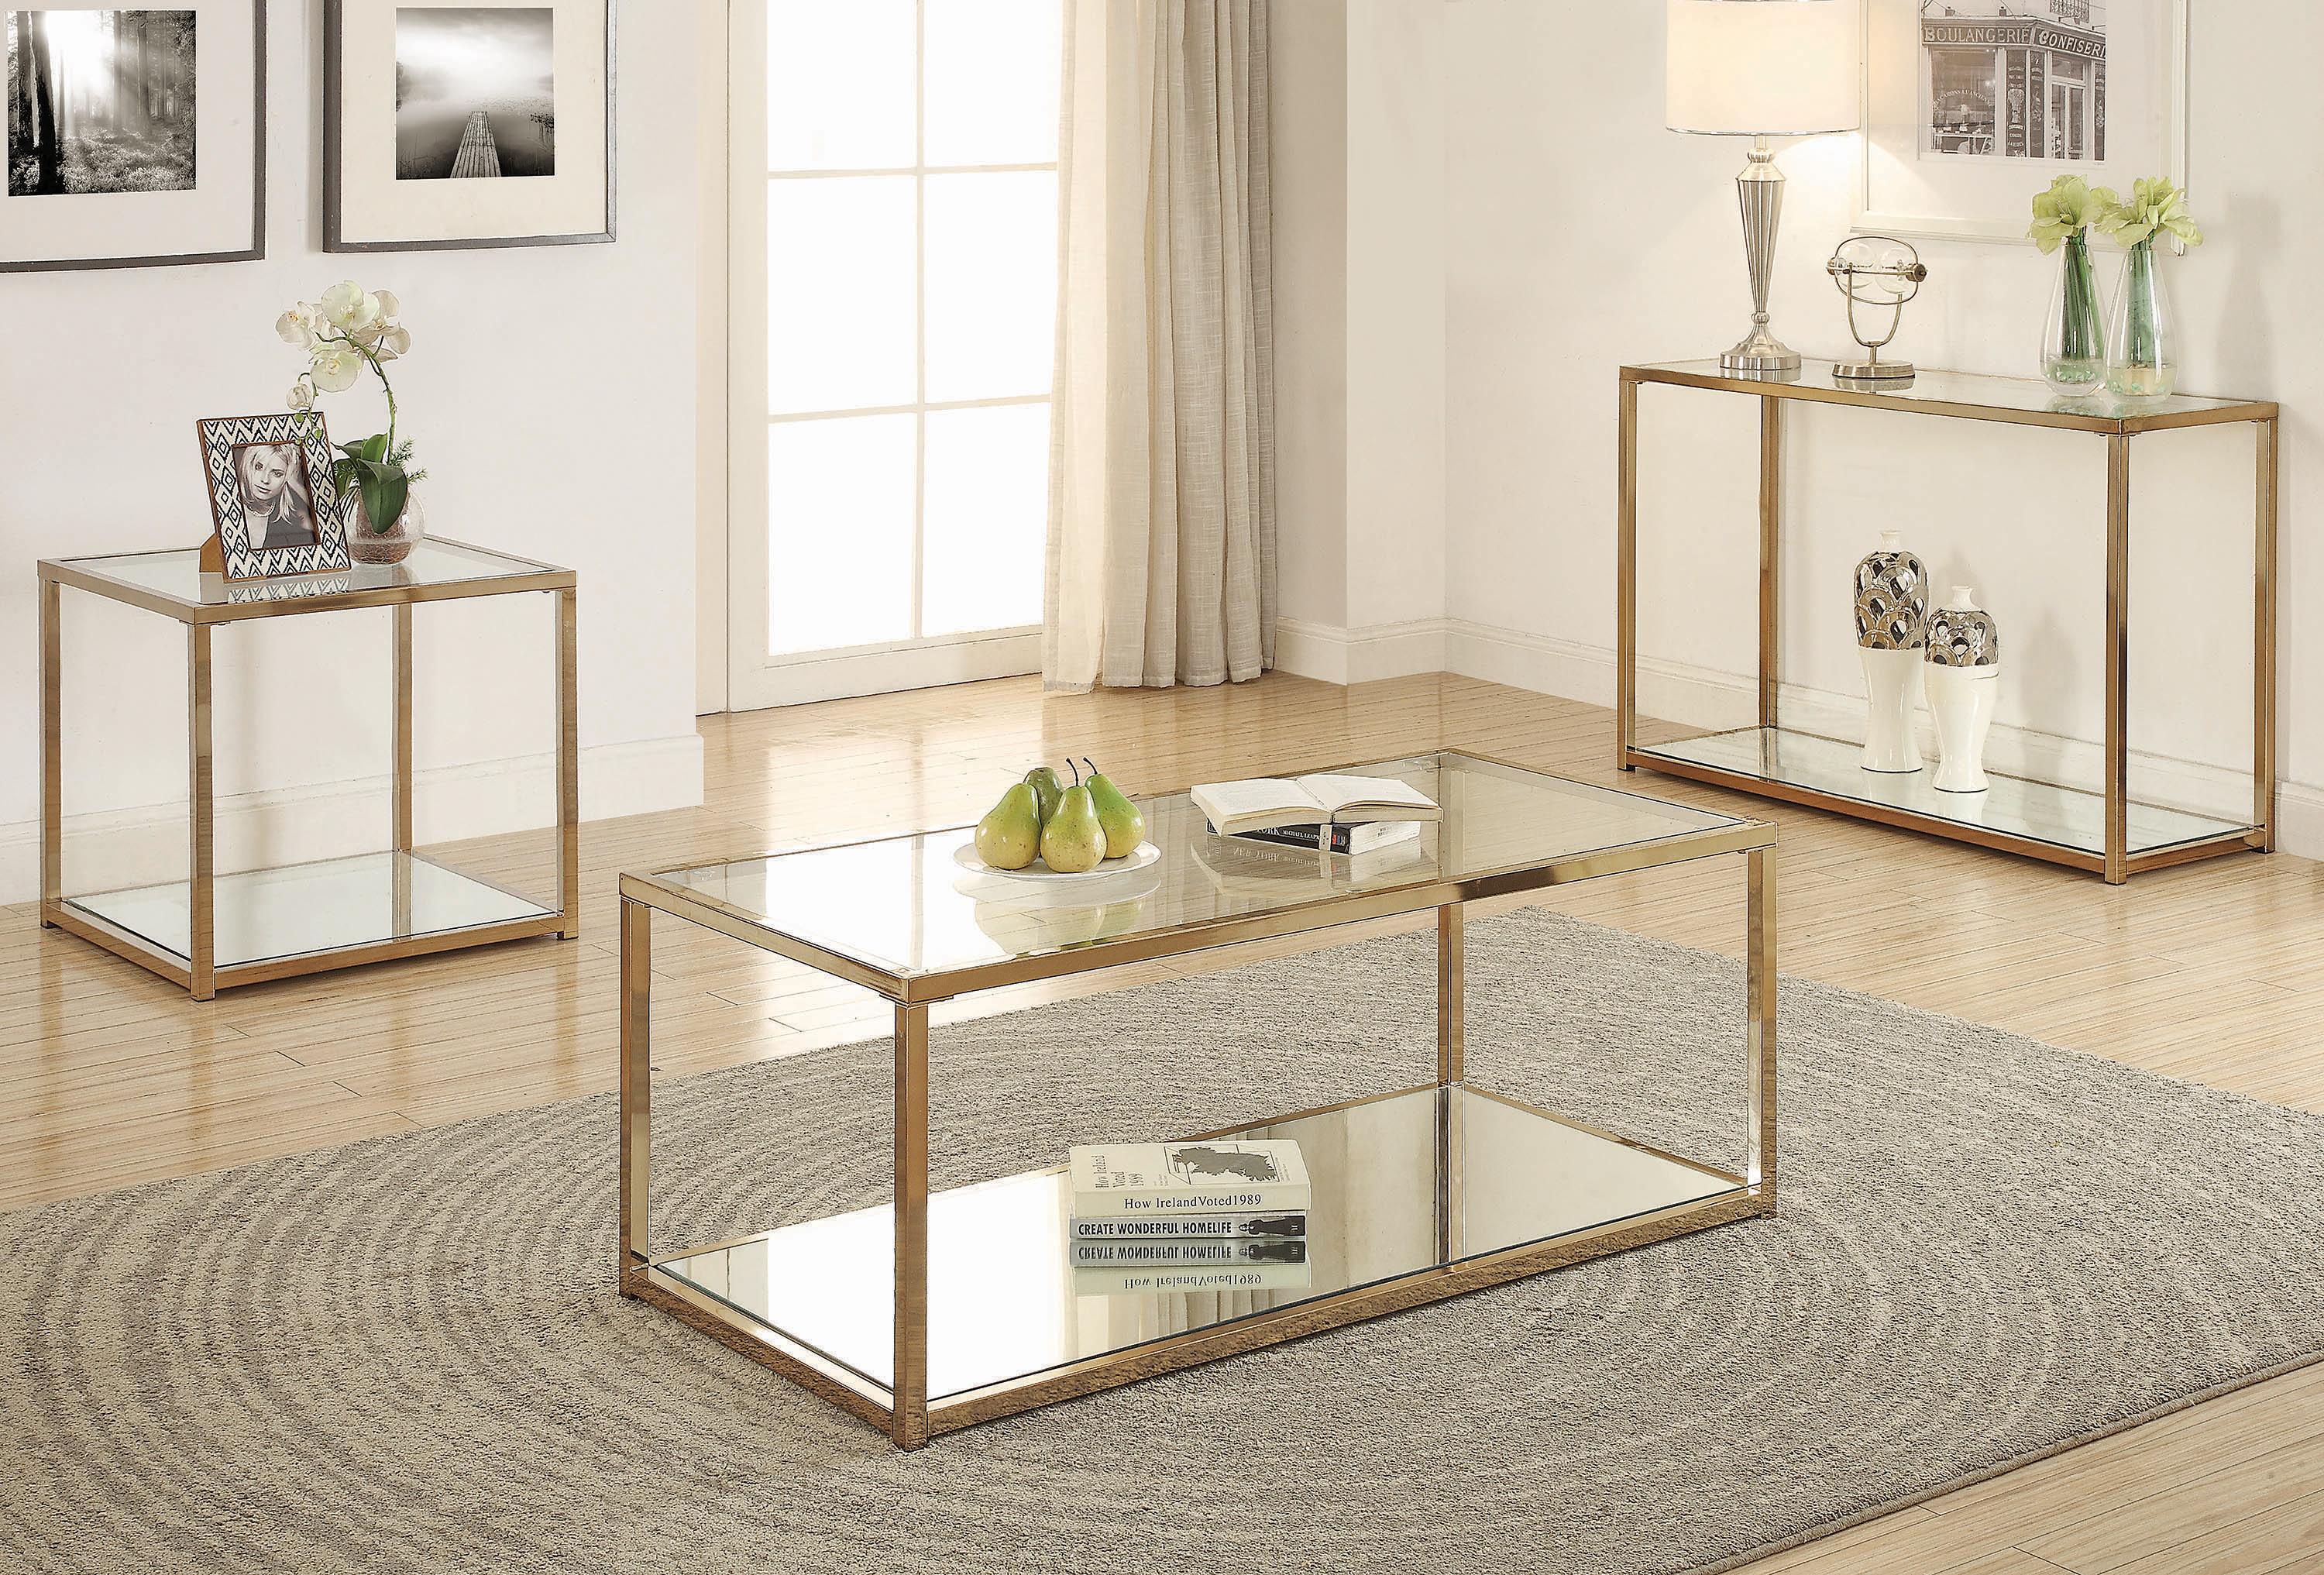 Transitional Coffee Table Set 705238-S3 705238-S3 in Chrome 